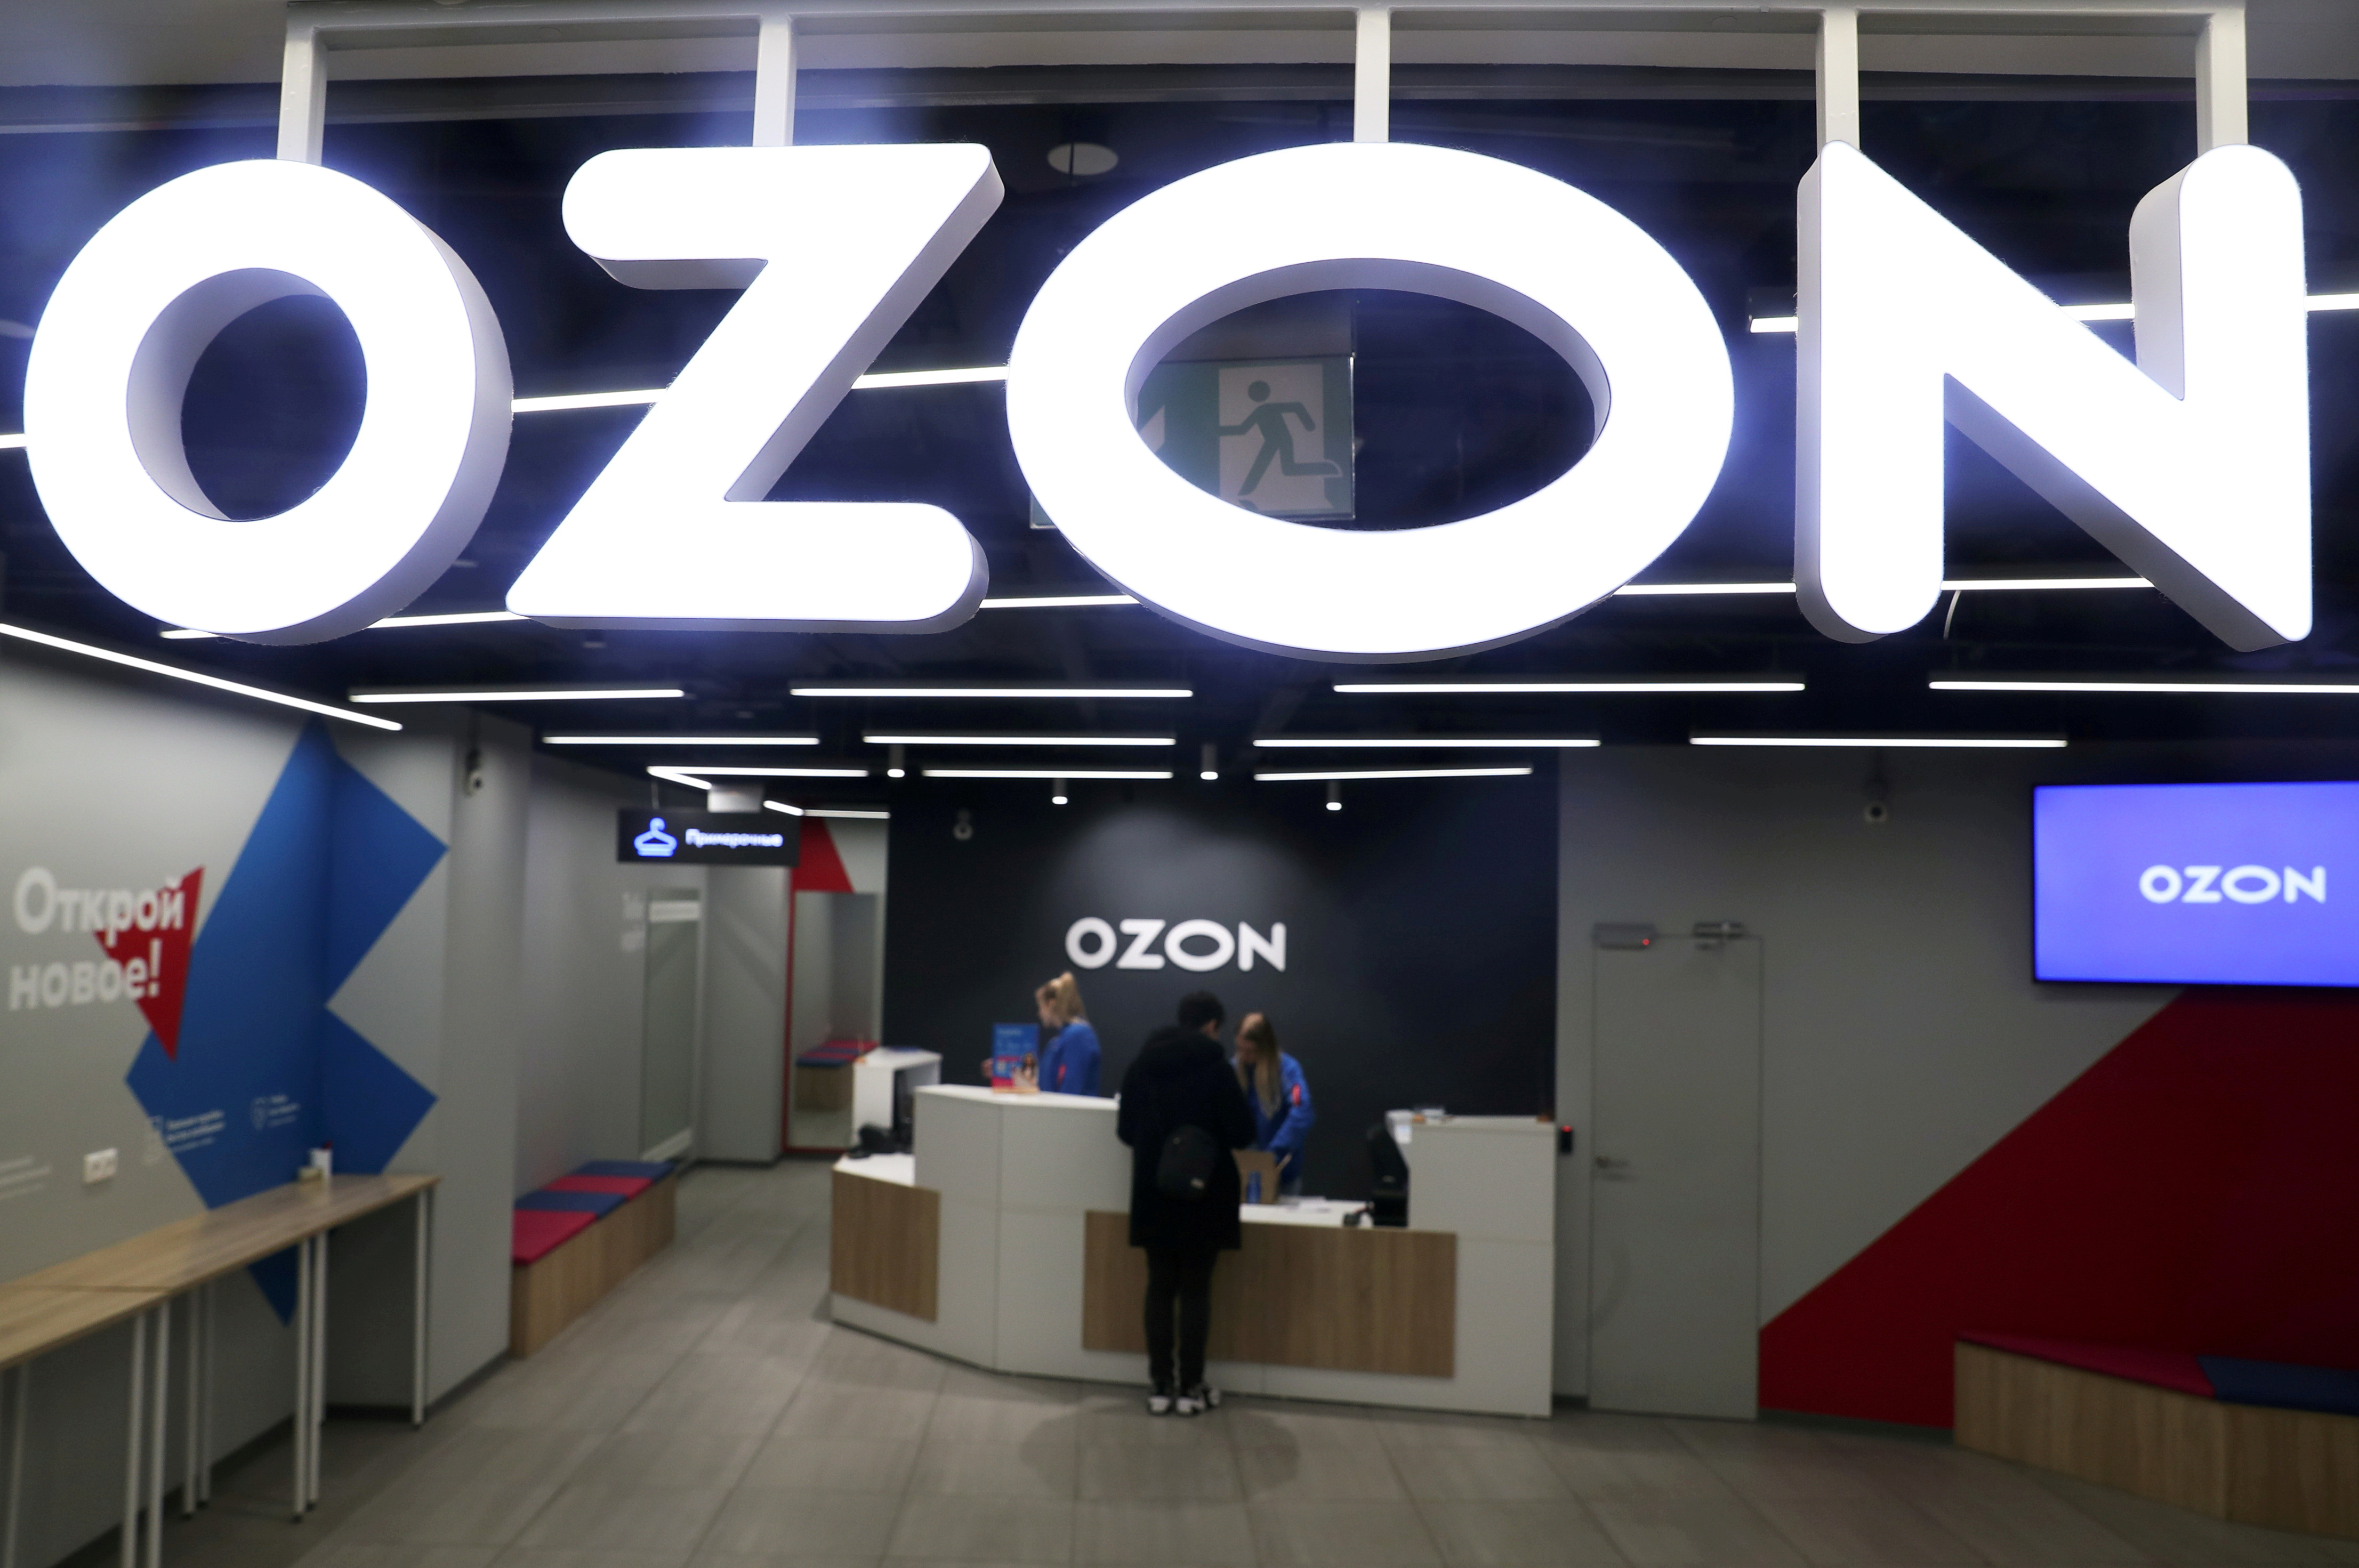 FILE PHOTO: A view shows the pick-up point of the Ozon online retailer in Moscow